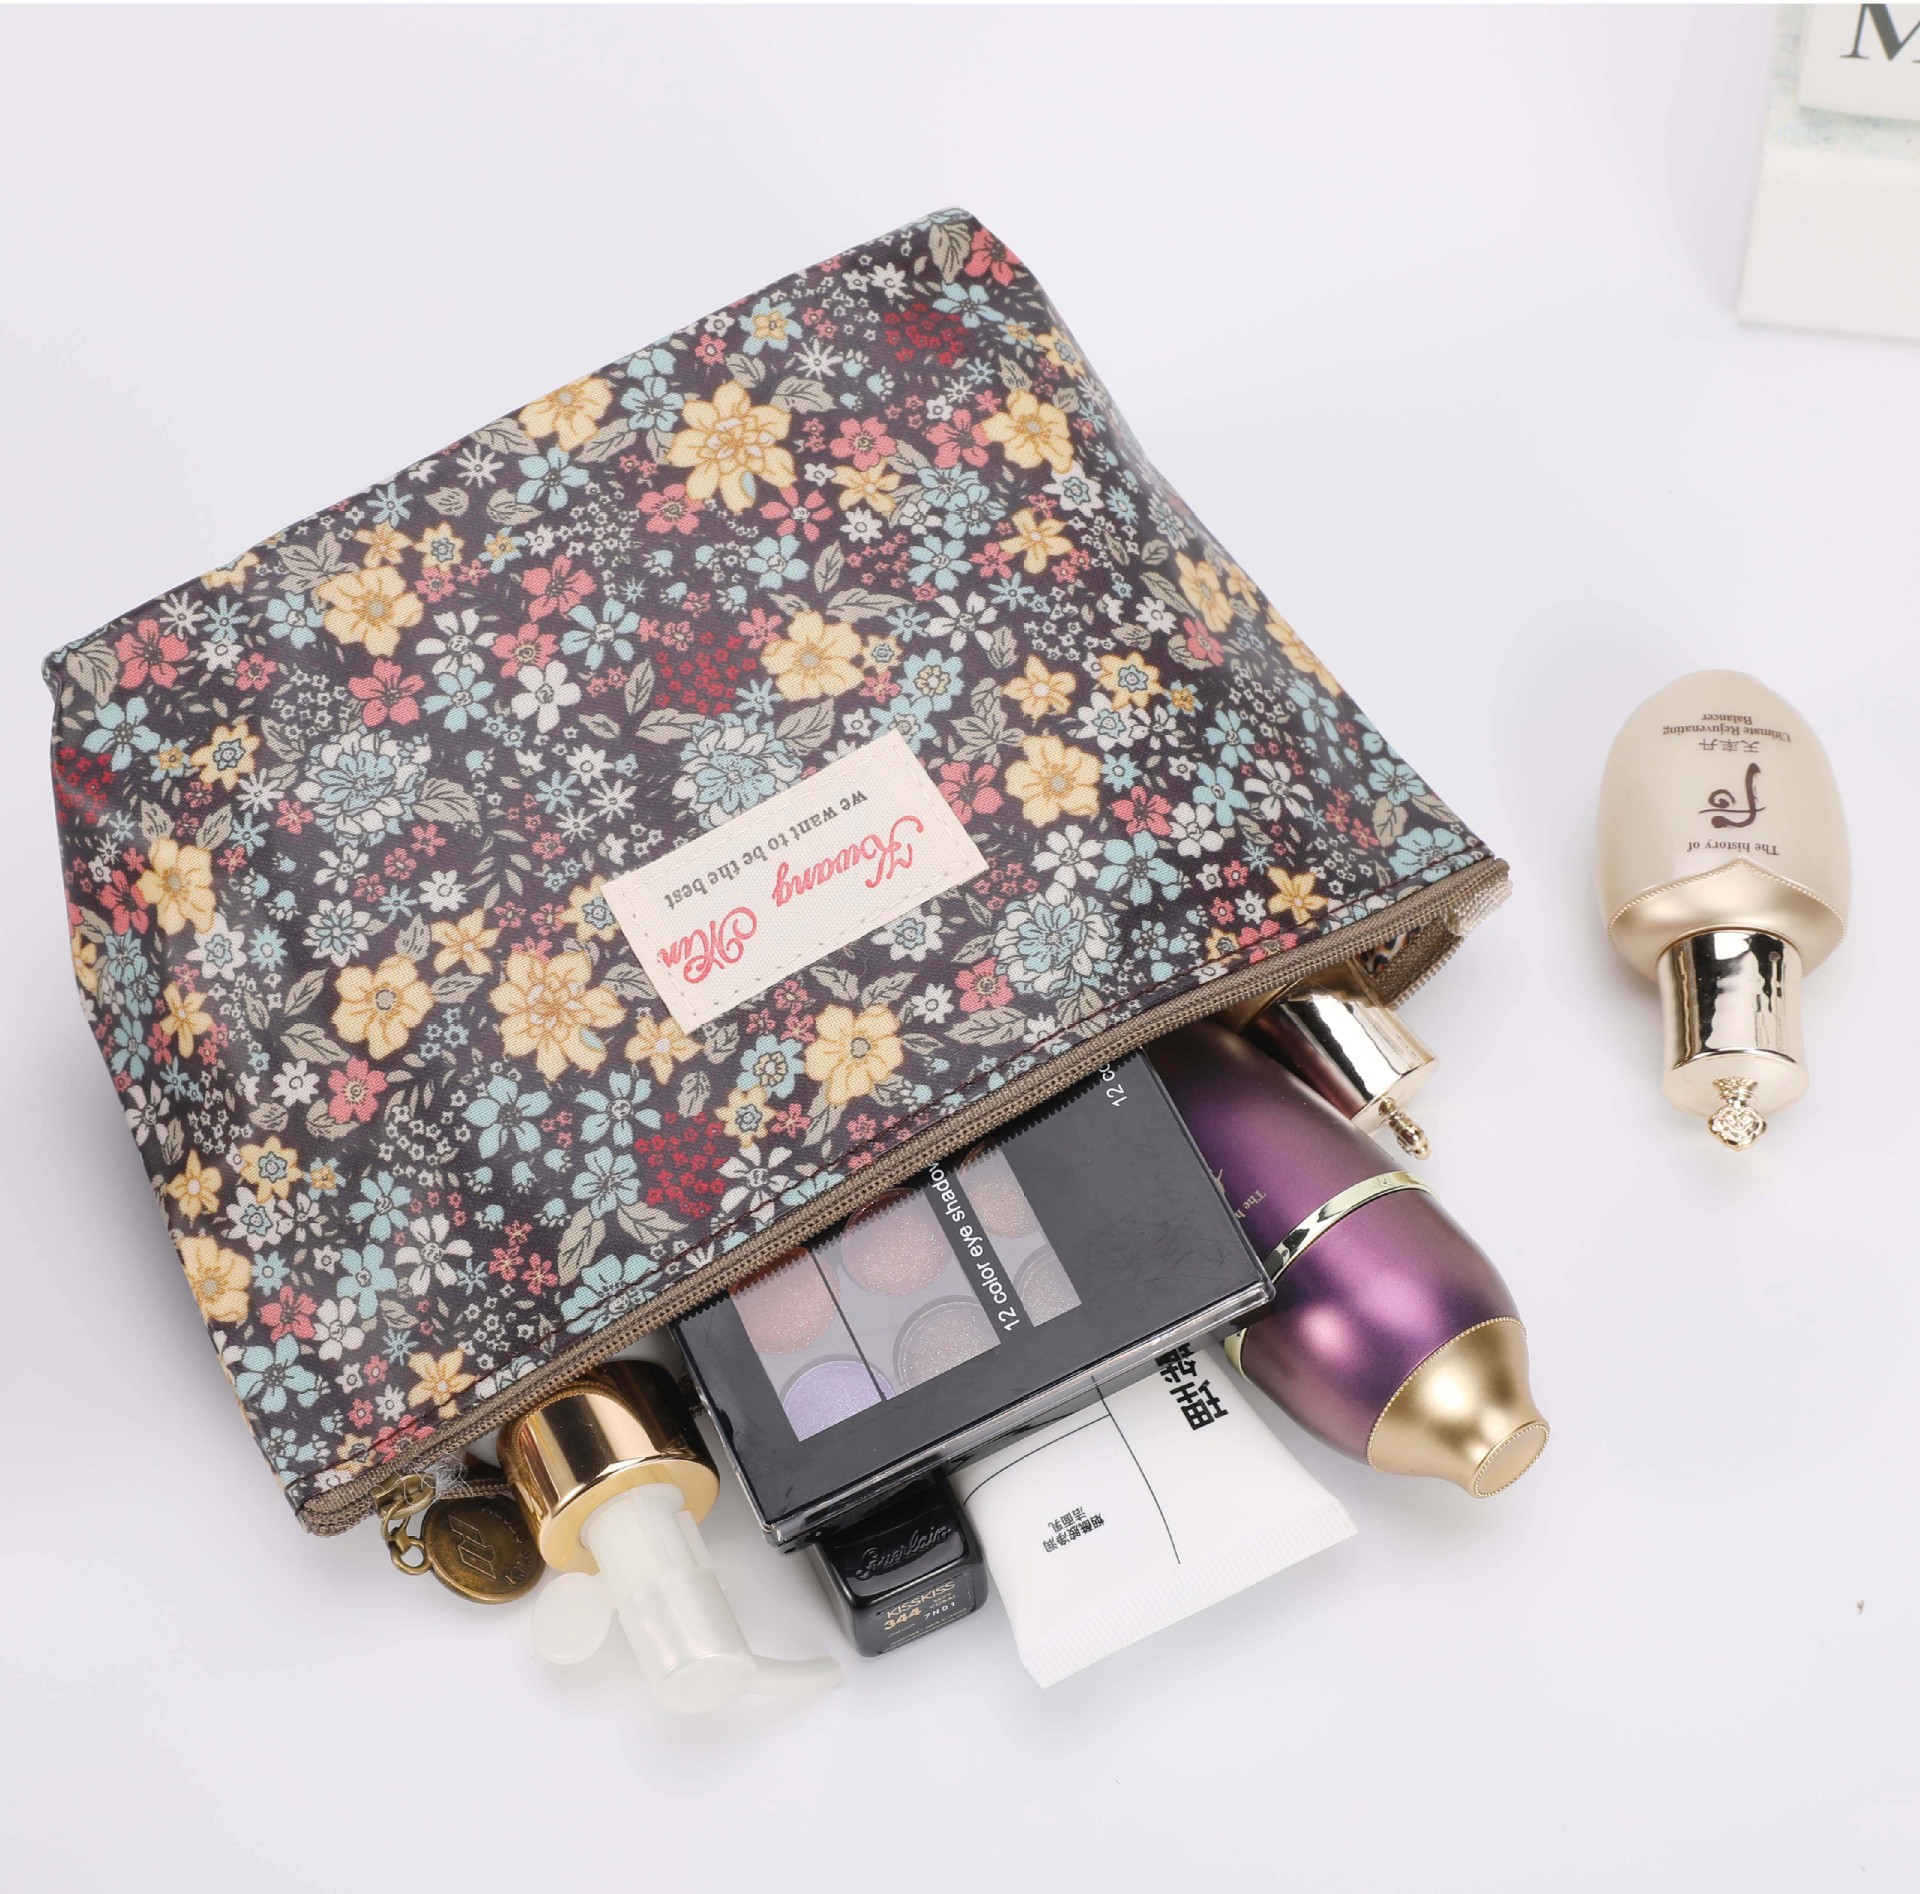 New Cosmetic Bag Women's Foreign Trade Korean Floral Wash Bag Portable Waterproof Cotton Storage Bag Large Capacity Travel